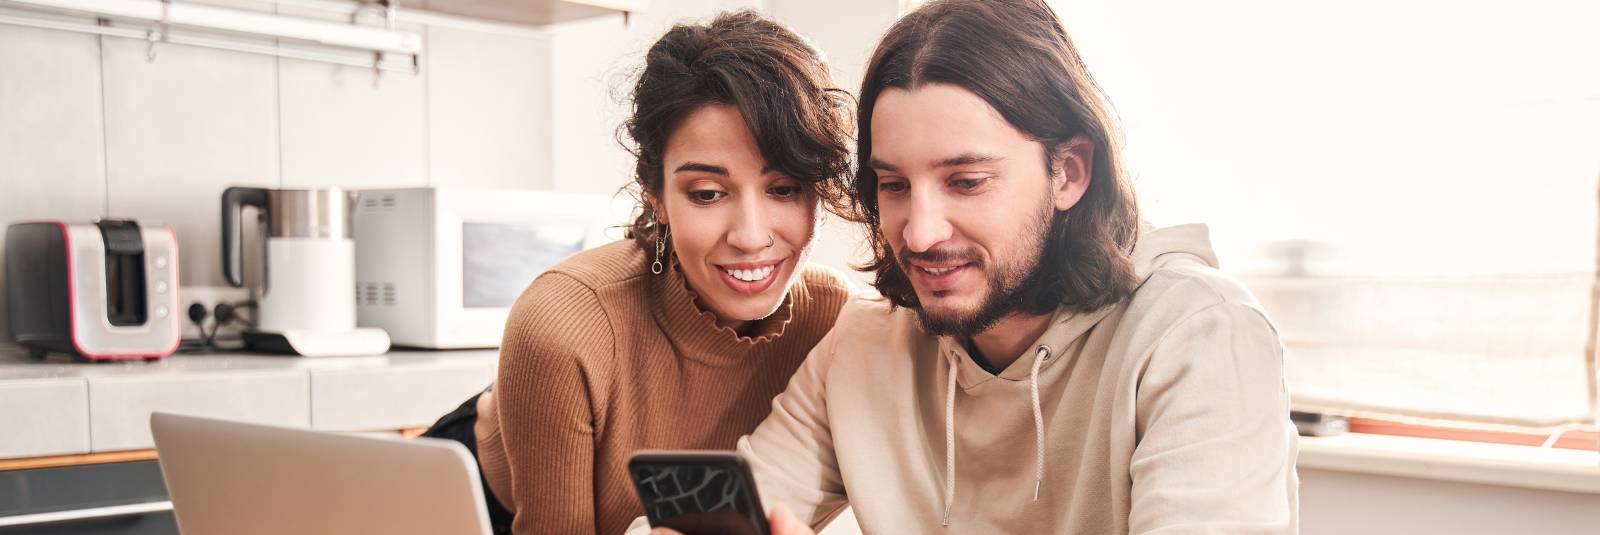 Couple looking at phone with computer open